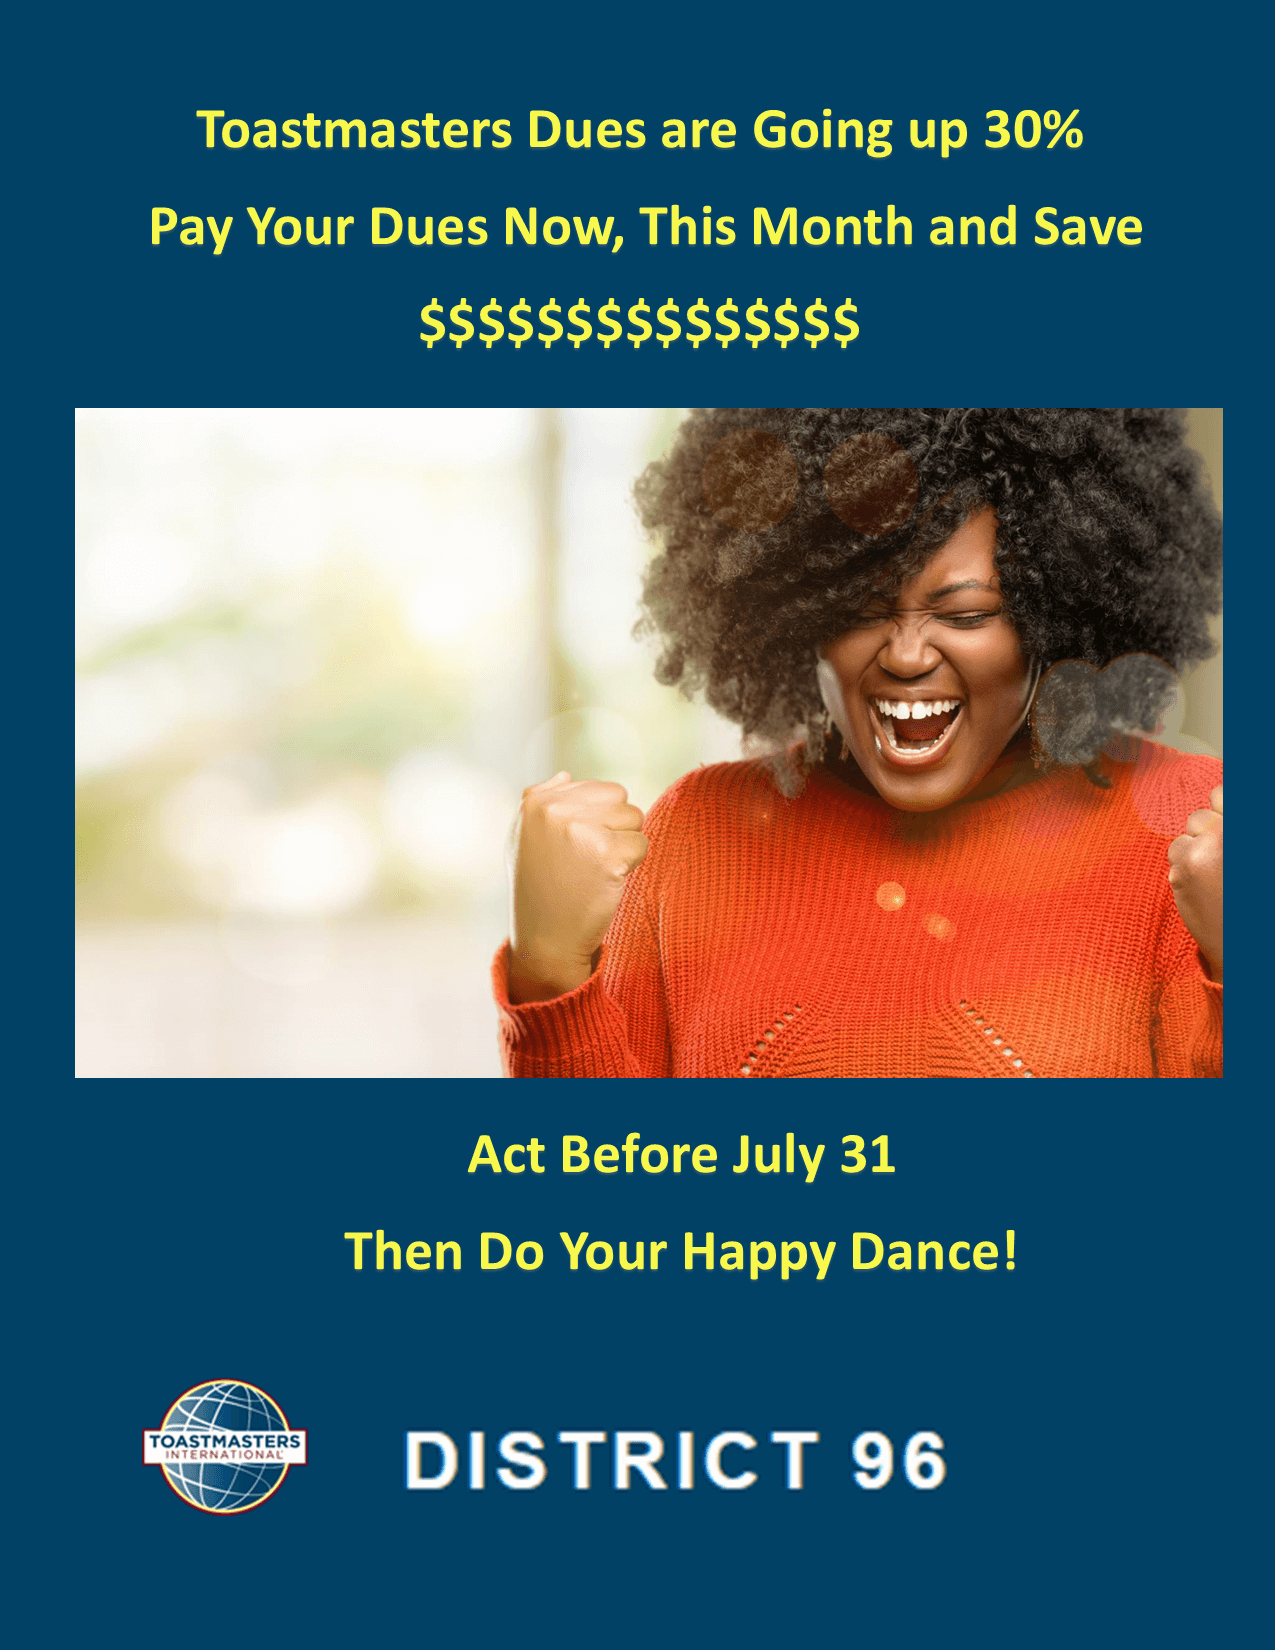 Pay your dues now and save money.